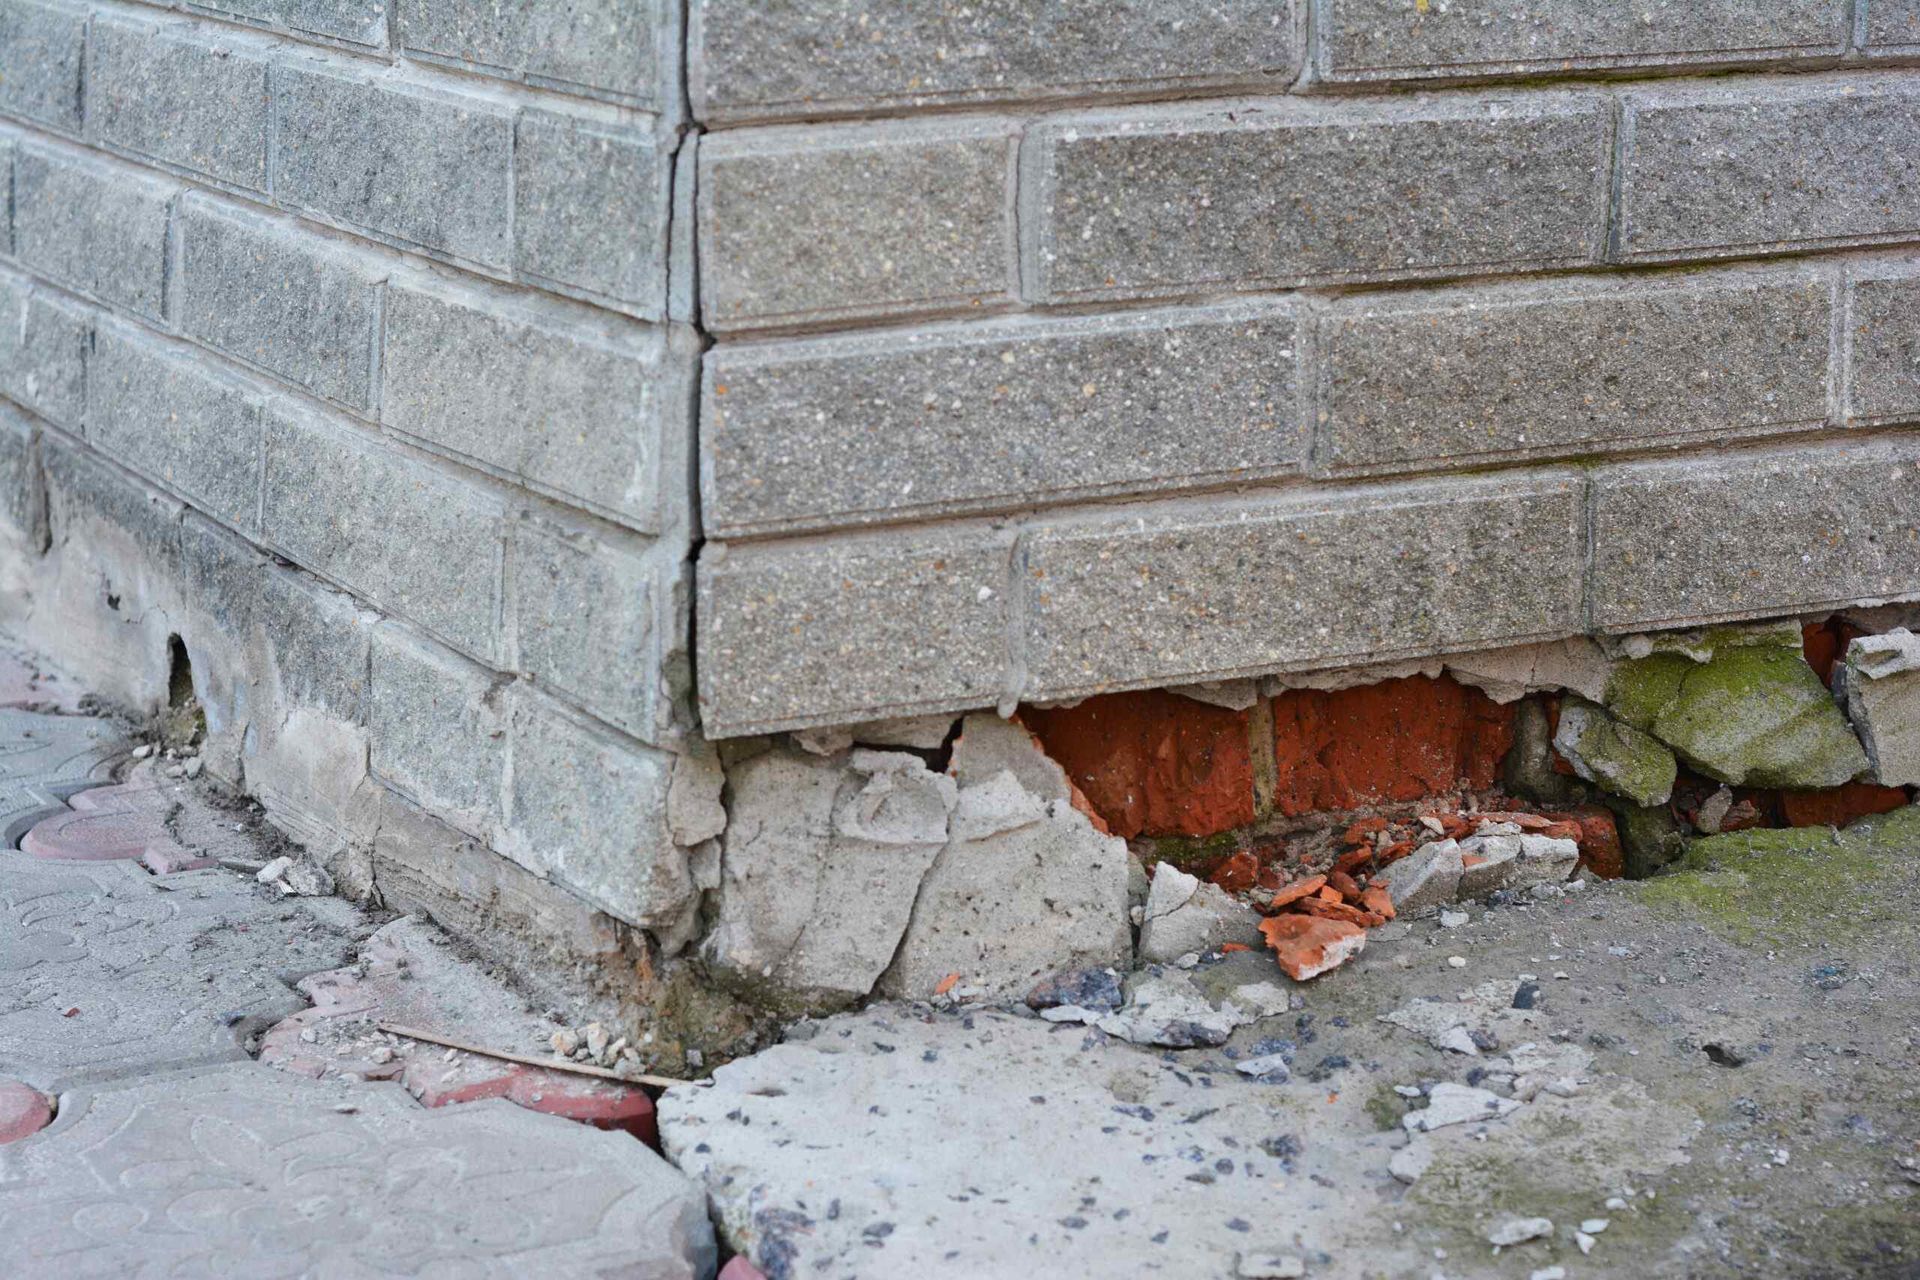 Crumbing Brick and Cement Foundation Needs Assessment and Expert Repair